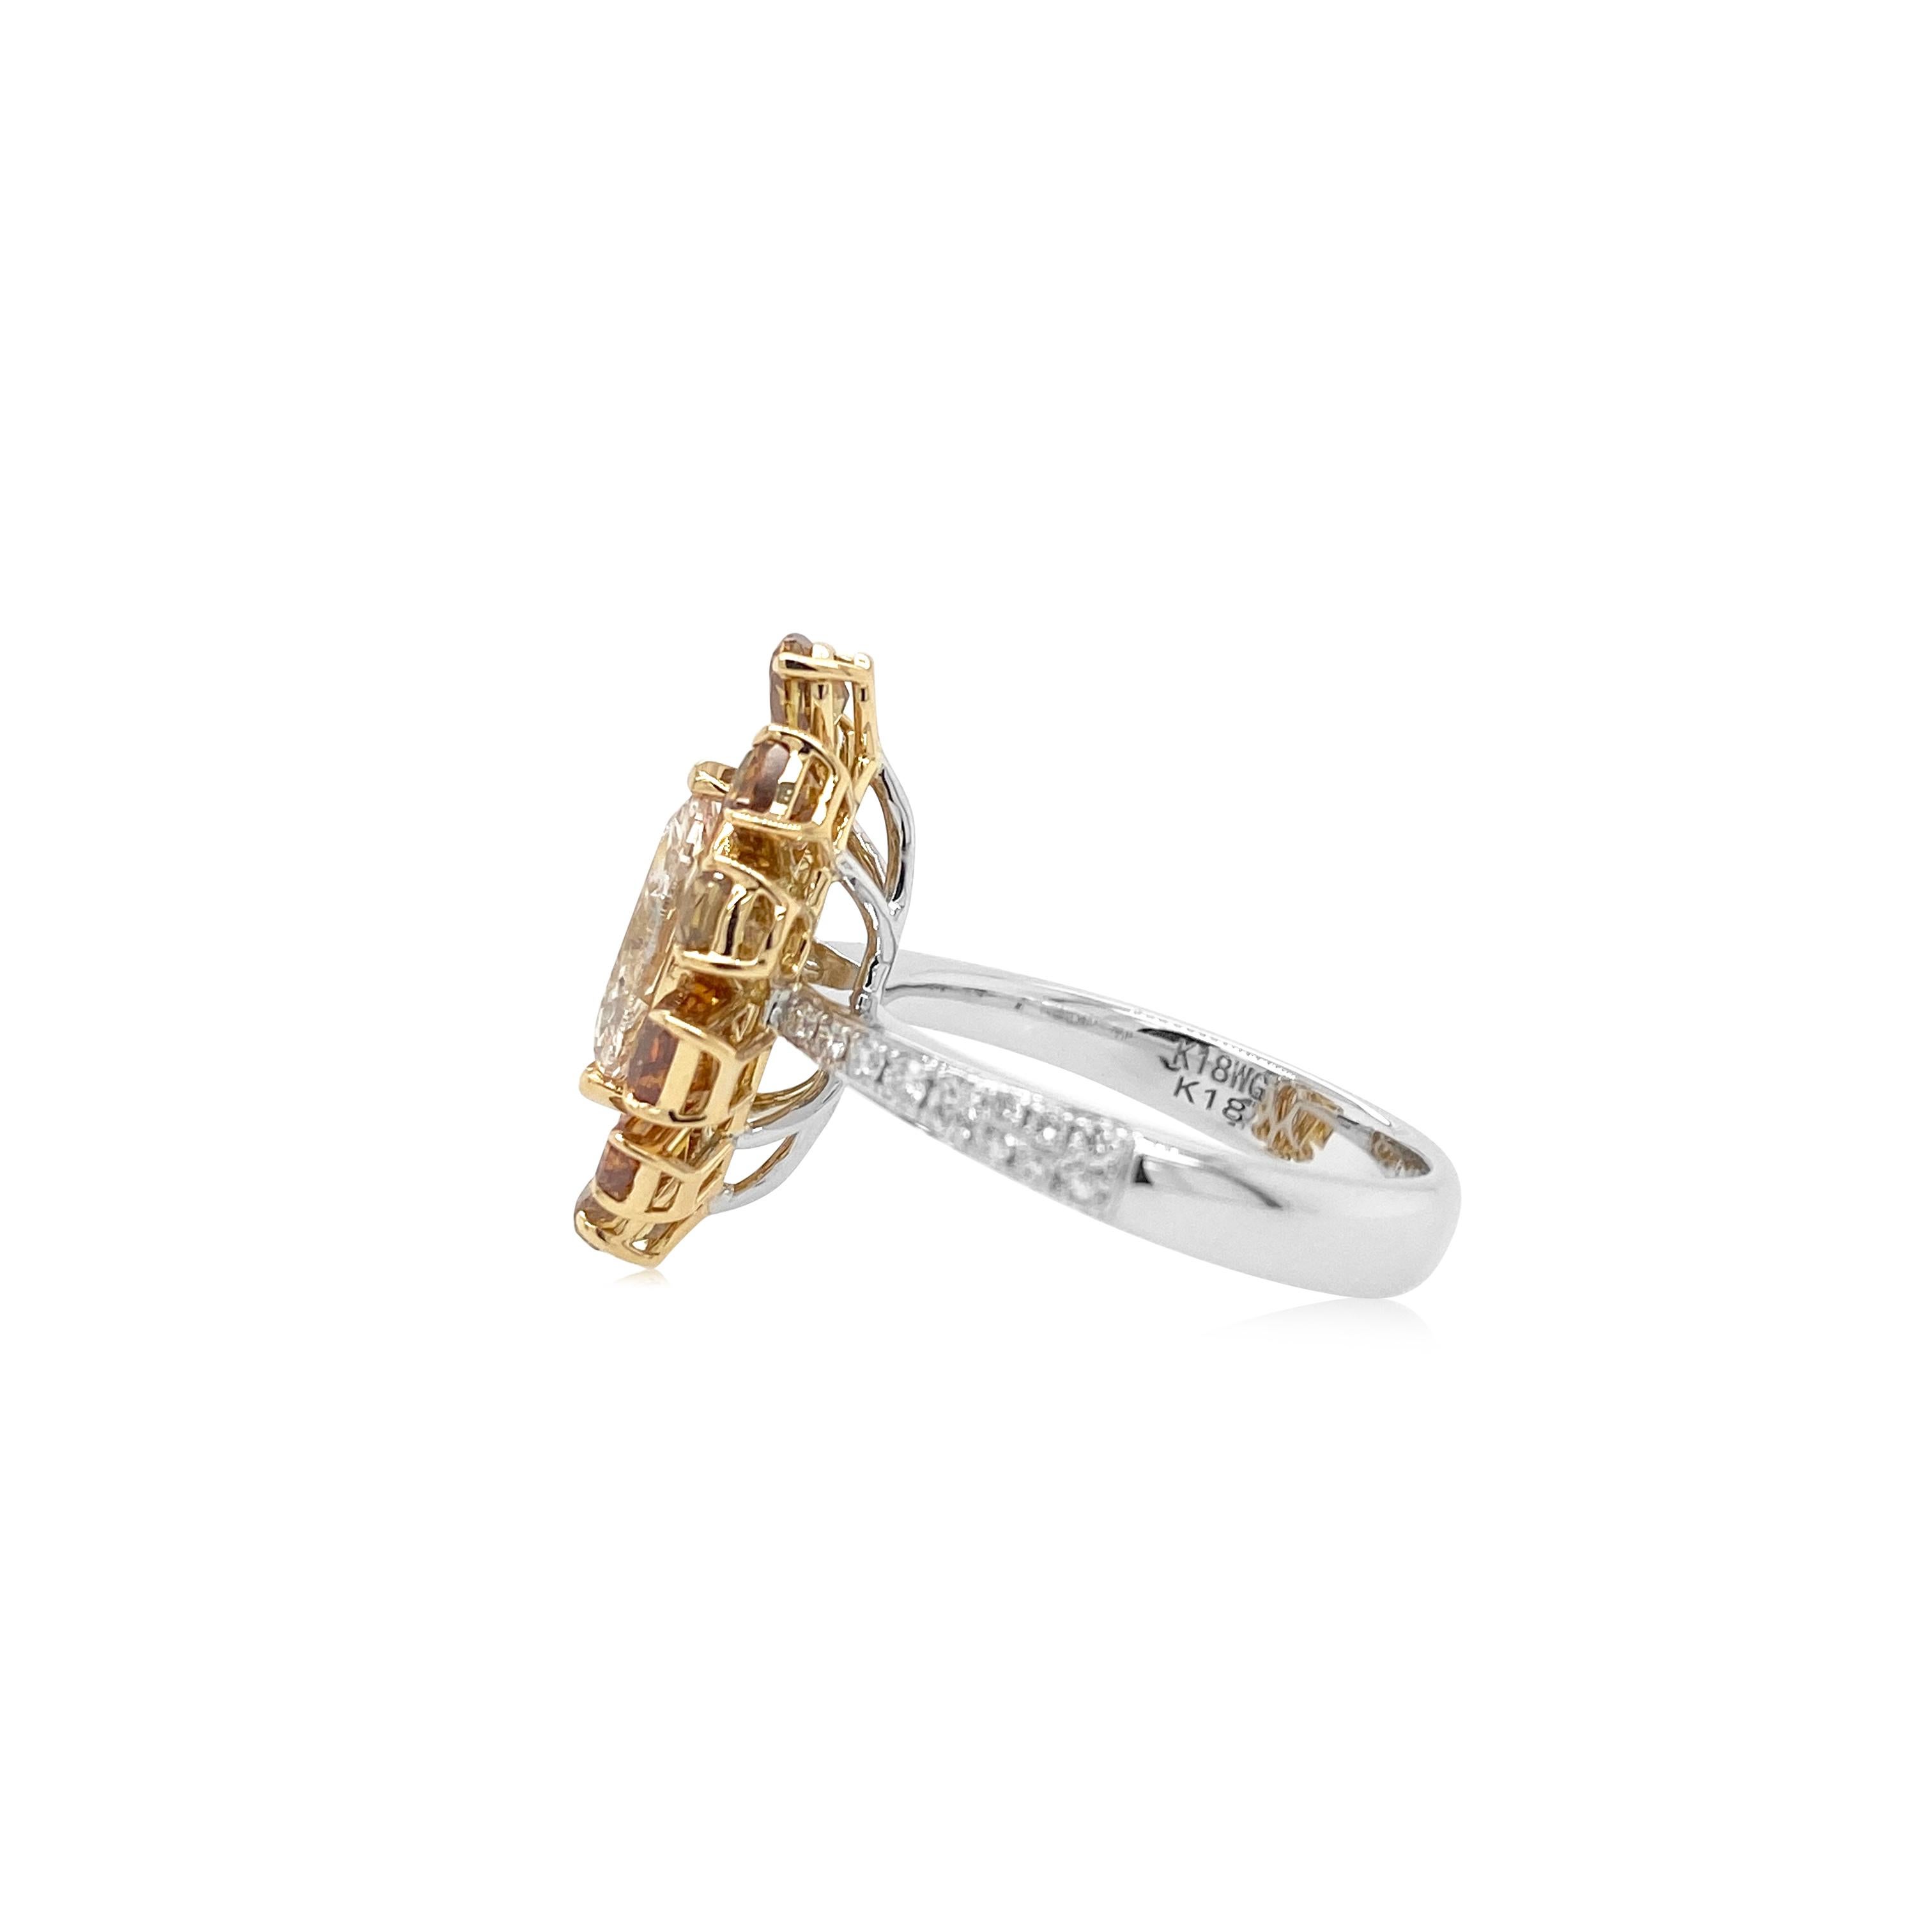 Marquise Cut Fancy Colored Diamond Cocktail Ring made in 18K Gold For Sale